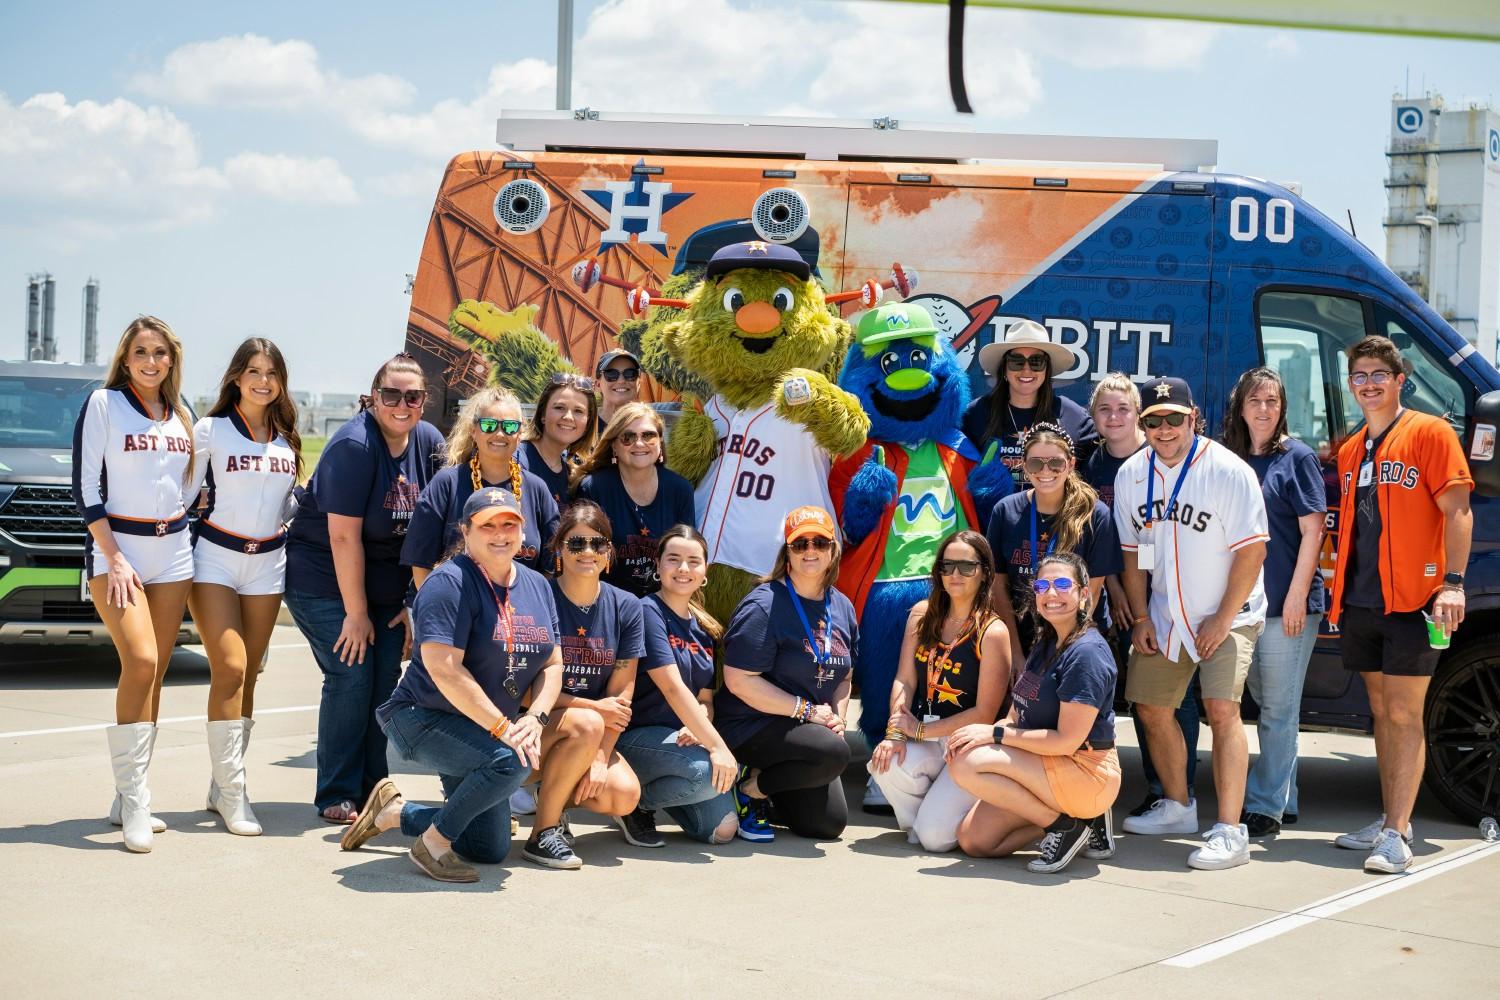 Annual Neches Ncredible Kids day with Houston Astros mascot Orbit, street team and shooting stars.